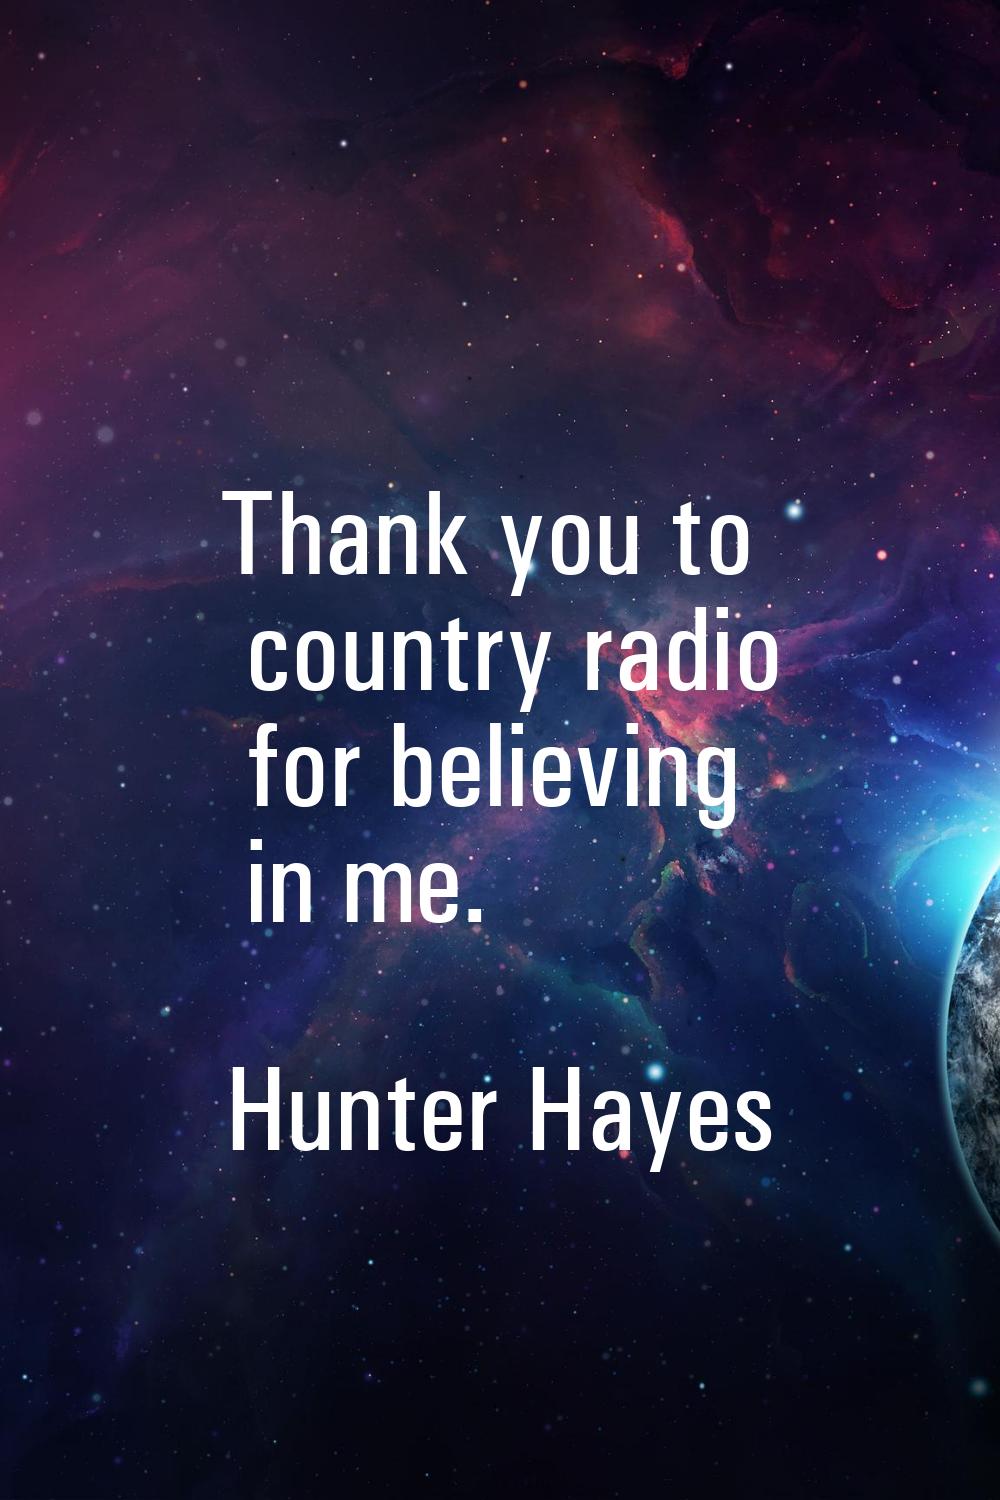 Thank you to country radio for believing in me.